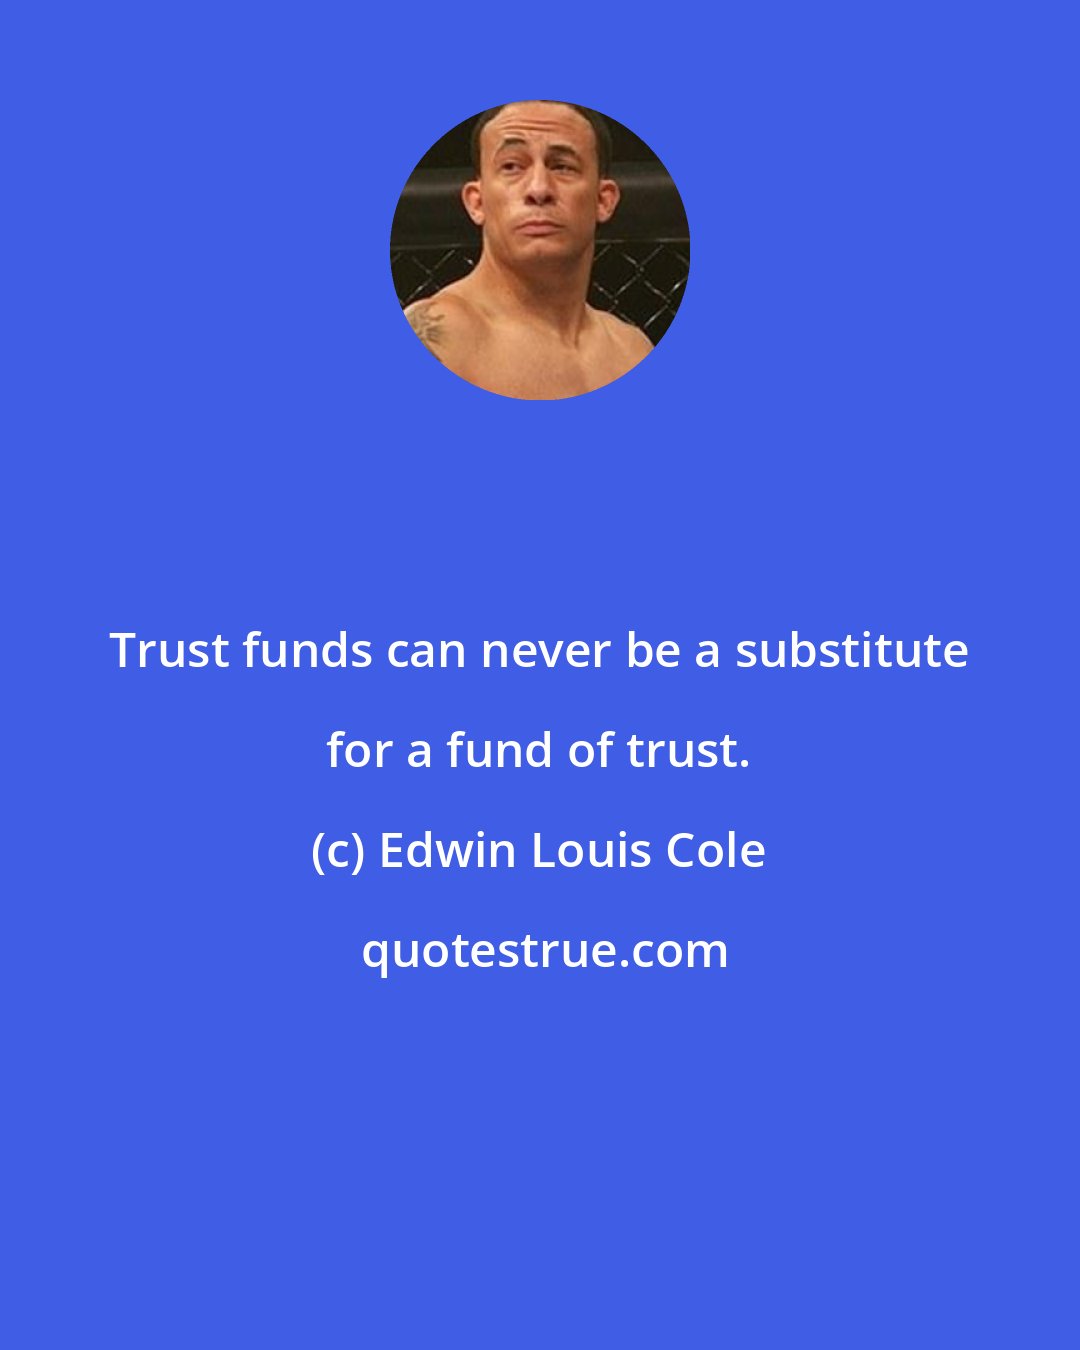 Edwin Louis Cole: Trust funds can never be a substitute for a fund of trust.